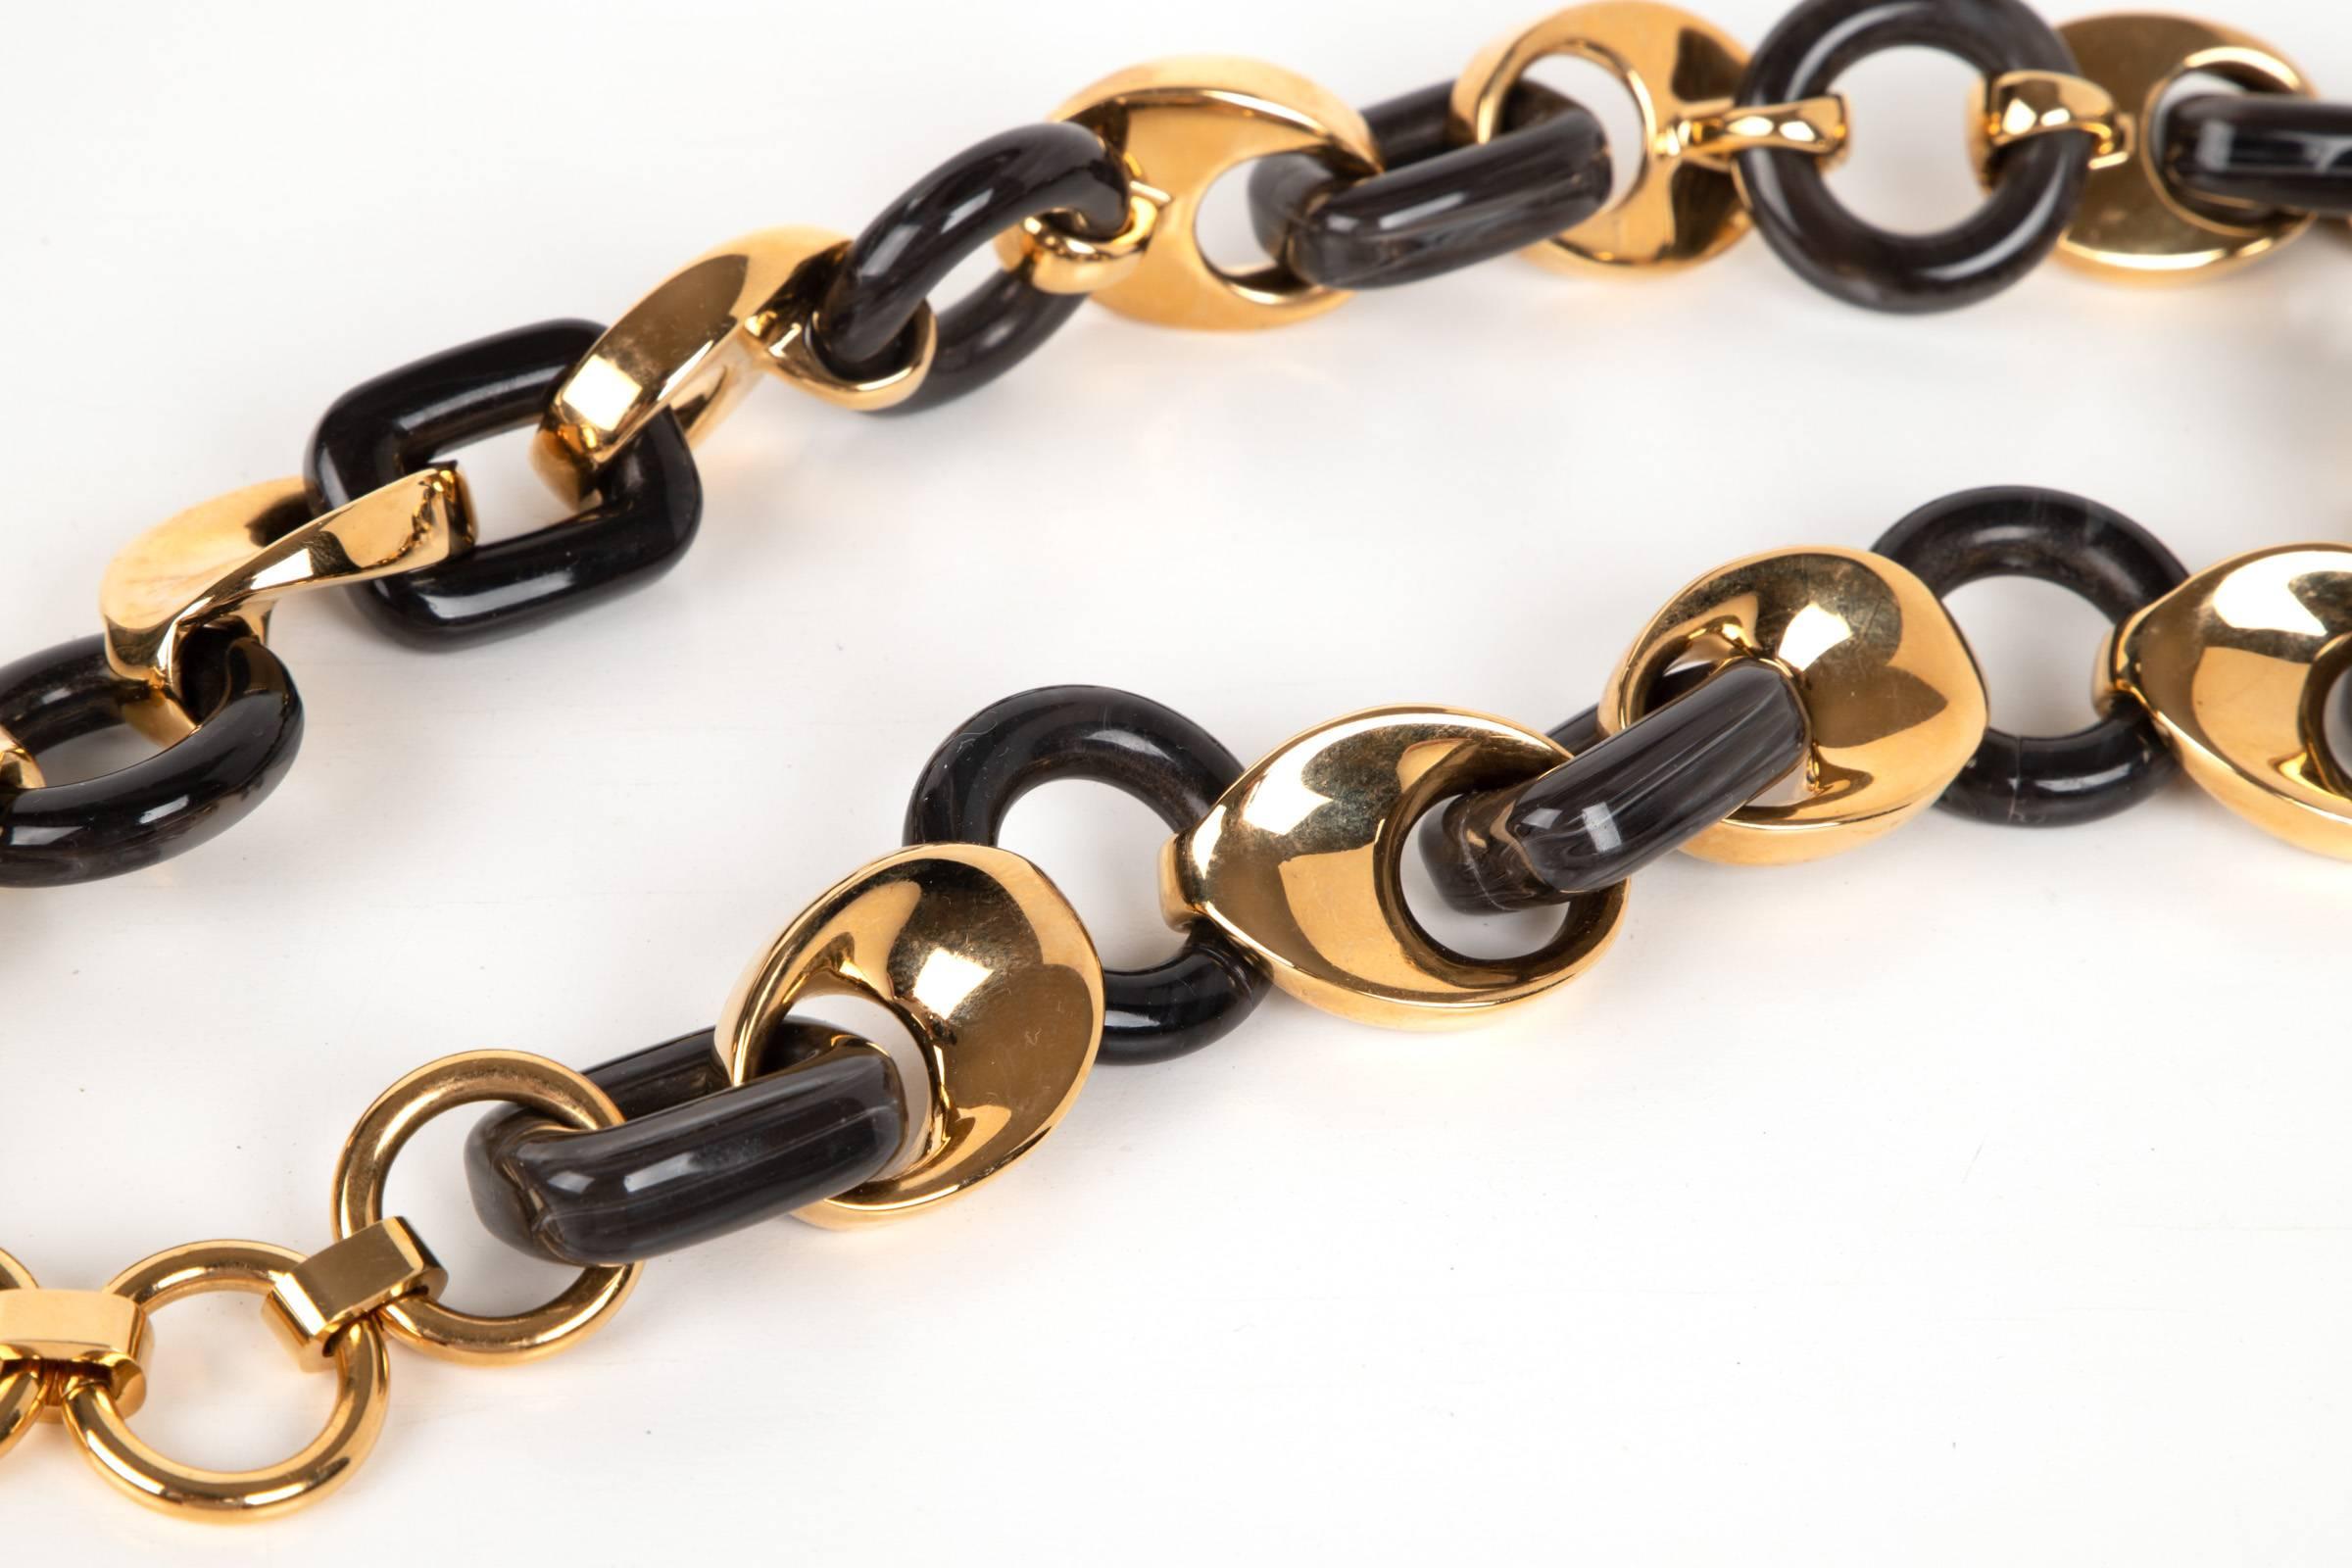 Guaranteed authentic Chloe link necklace.
Alternating links of gold and black lacquered acrylic.
Logo embossed metal link at closure.
Necklace can extend an additional 3